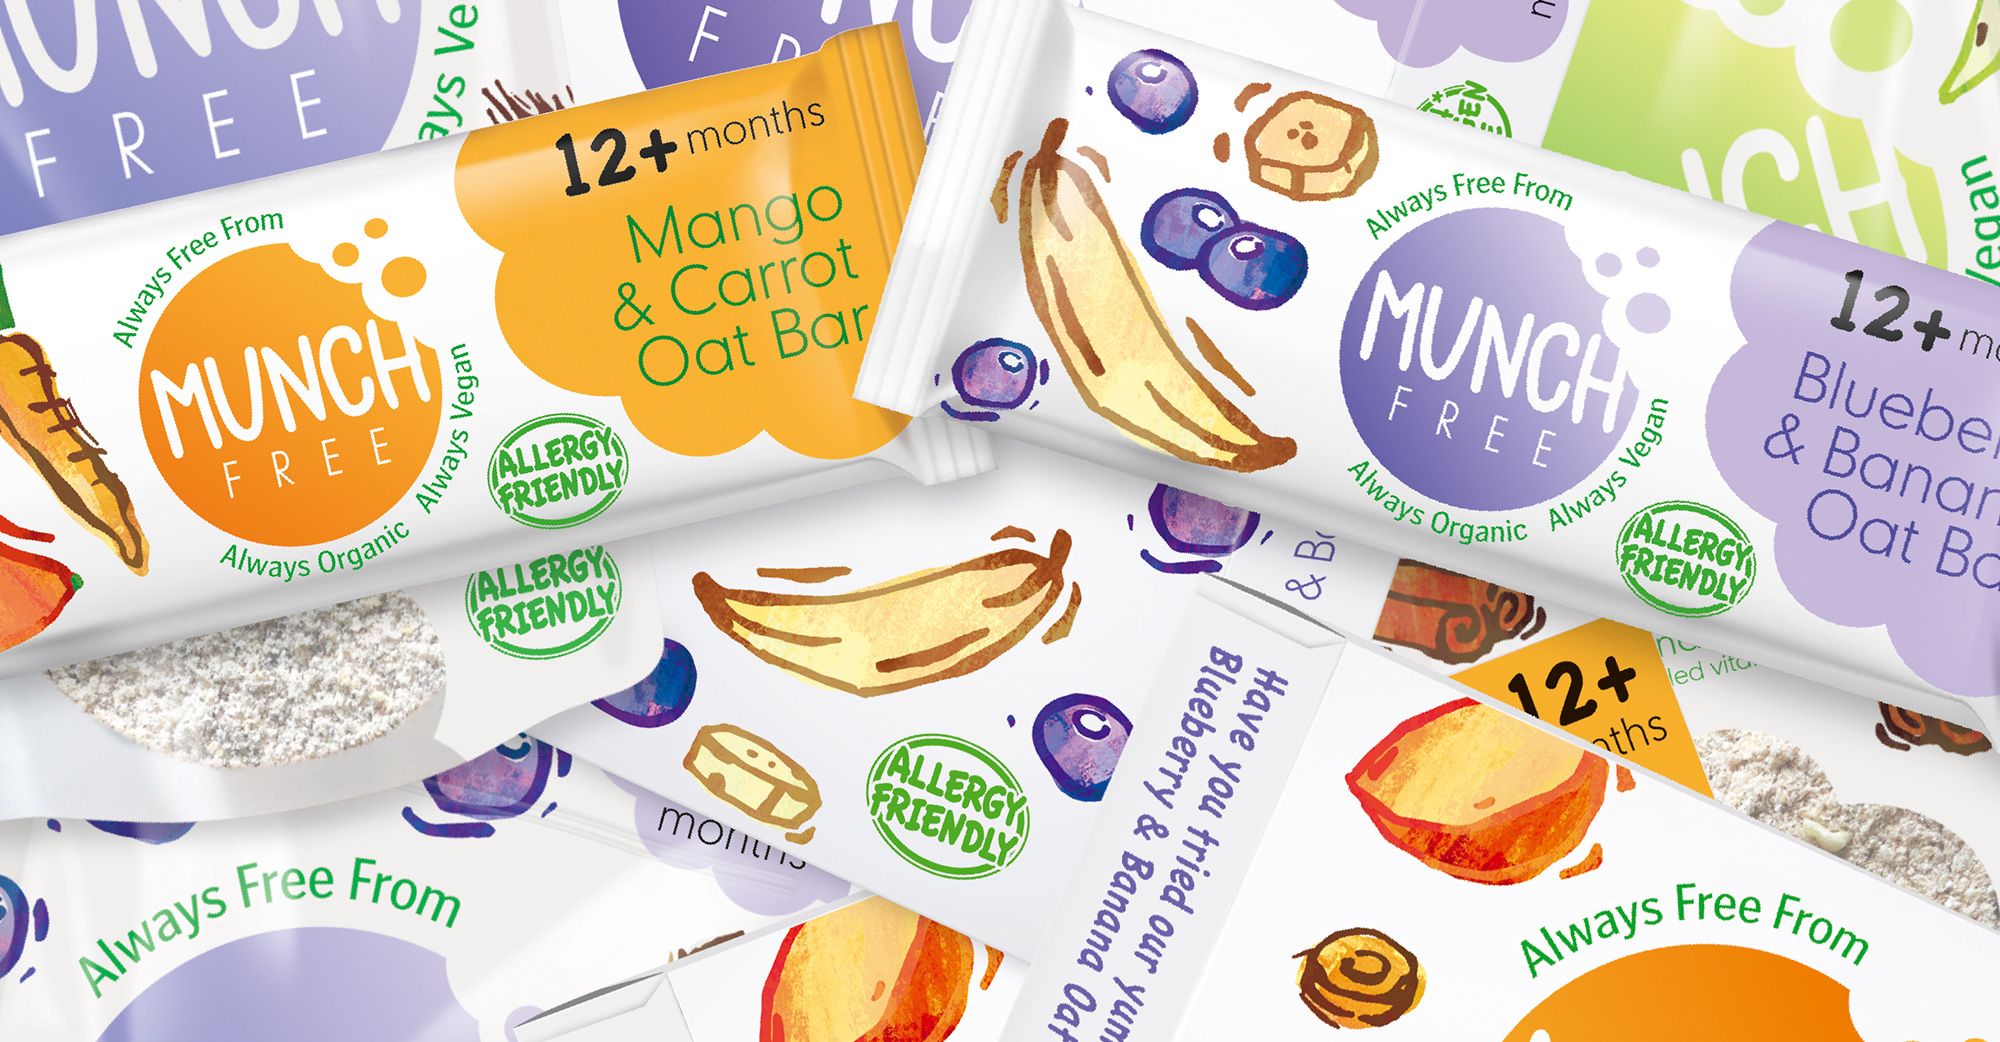 A promotional image of the Munch Free children's snack range.